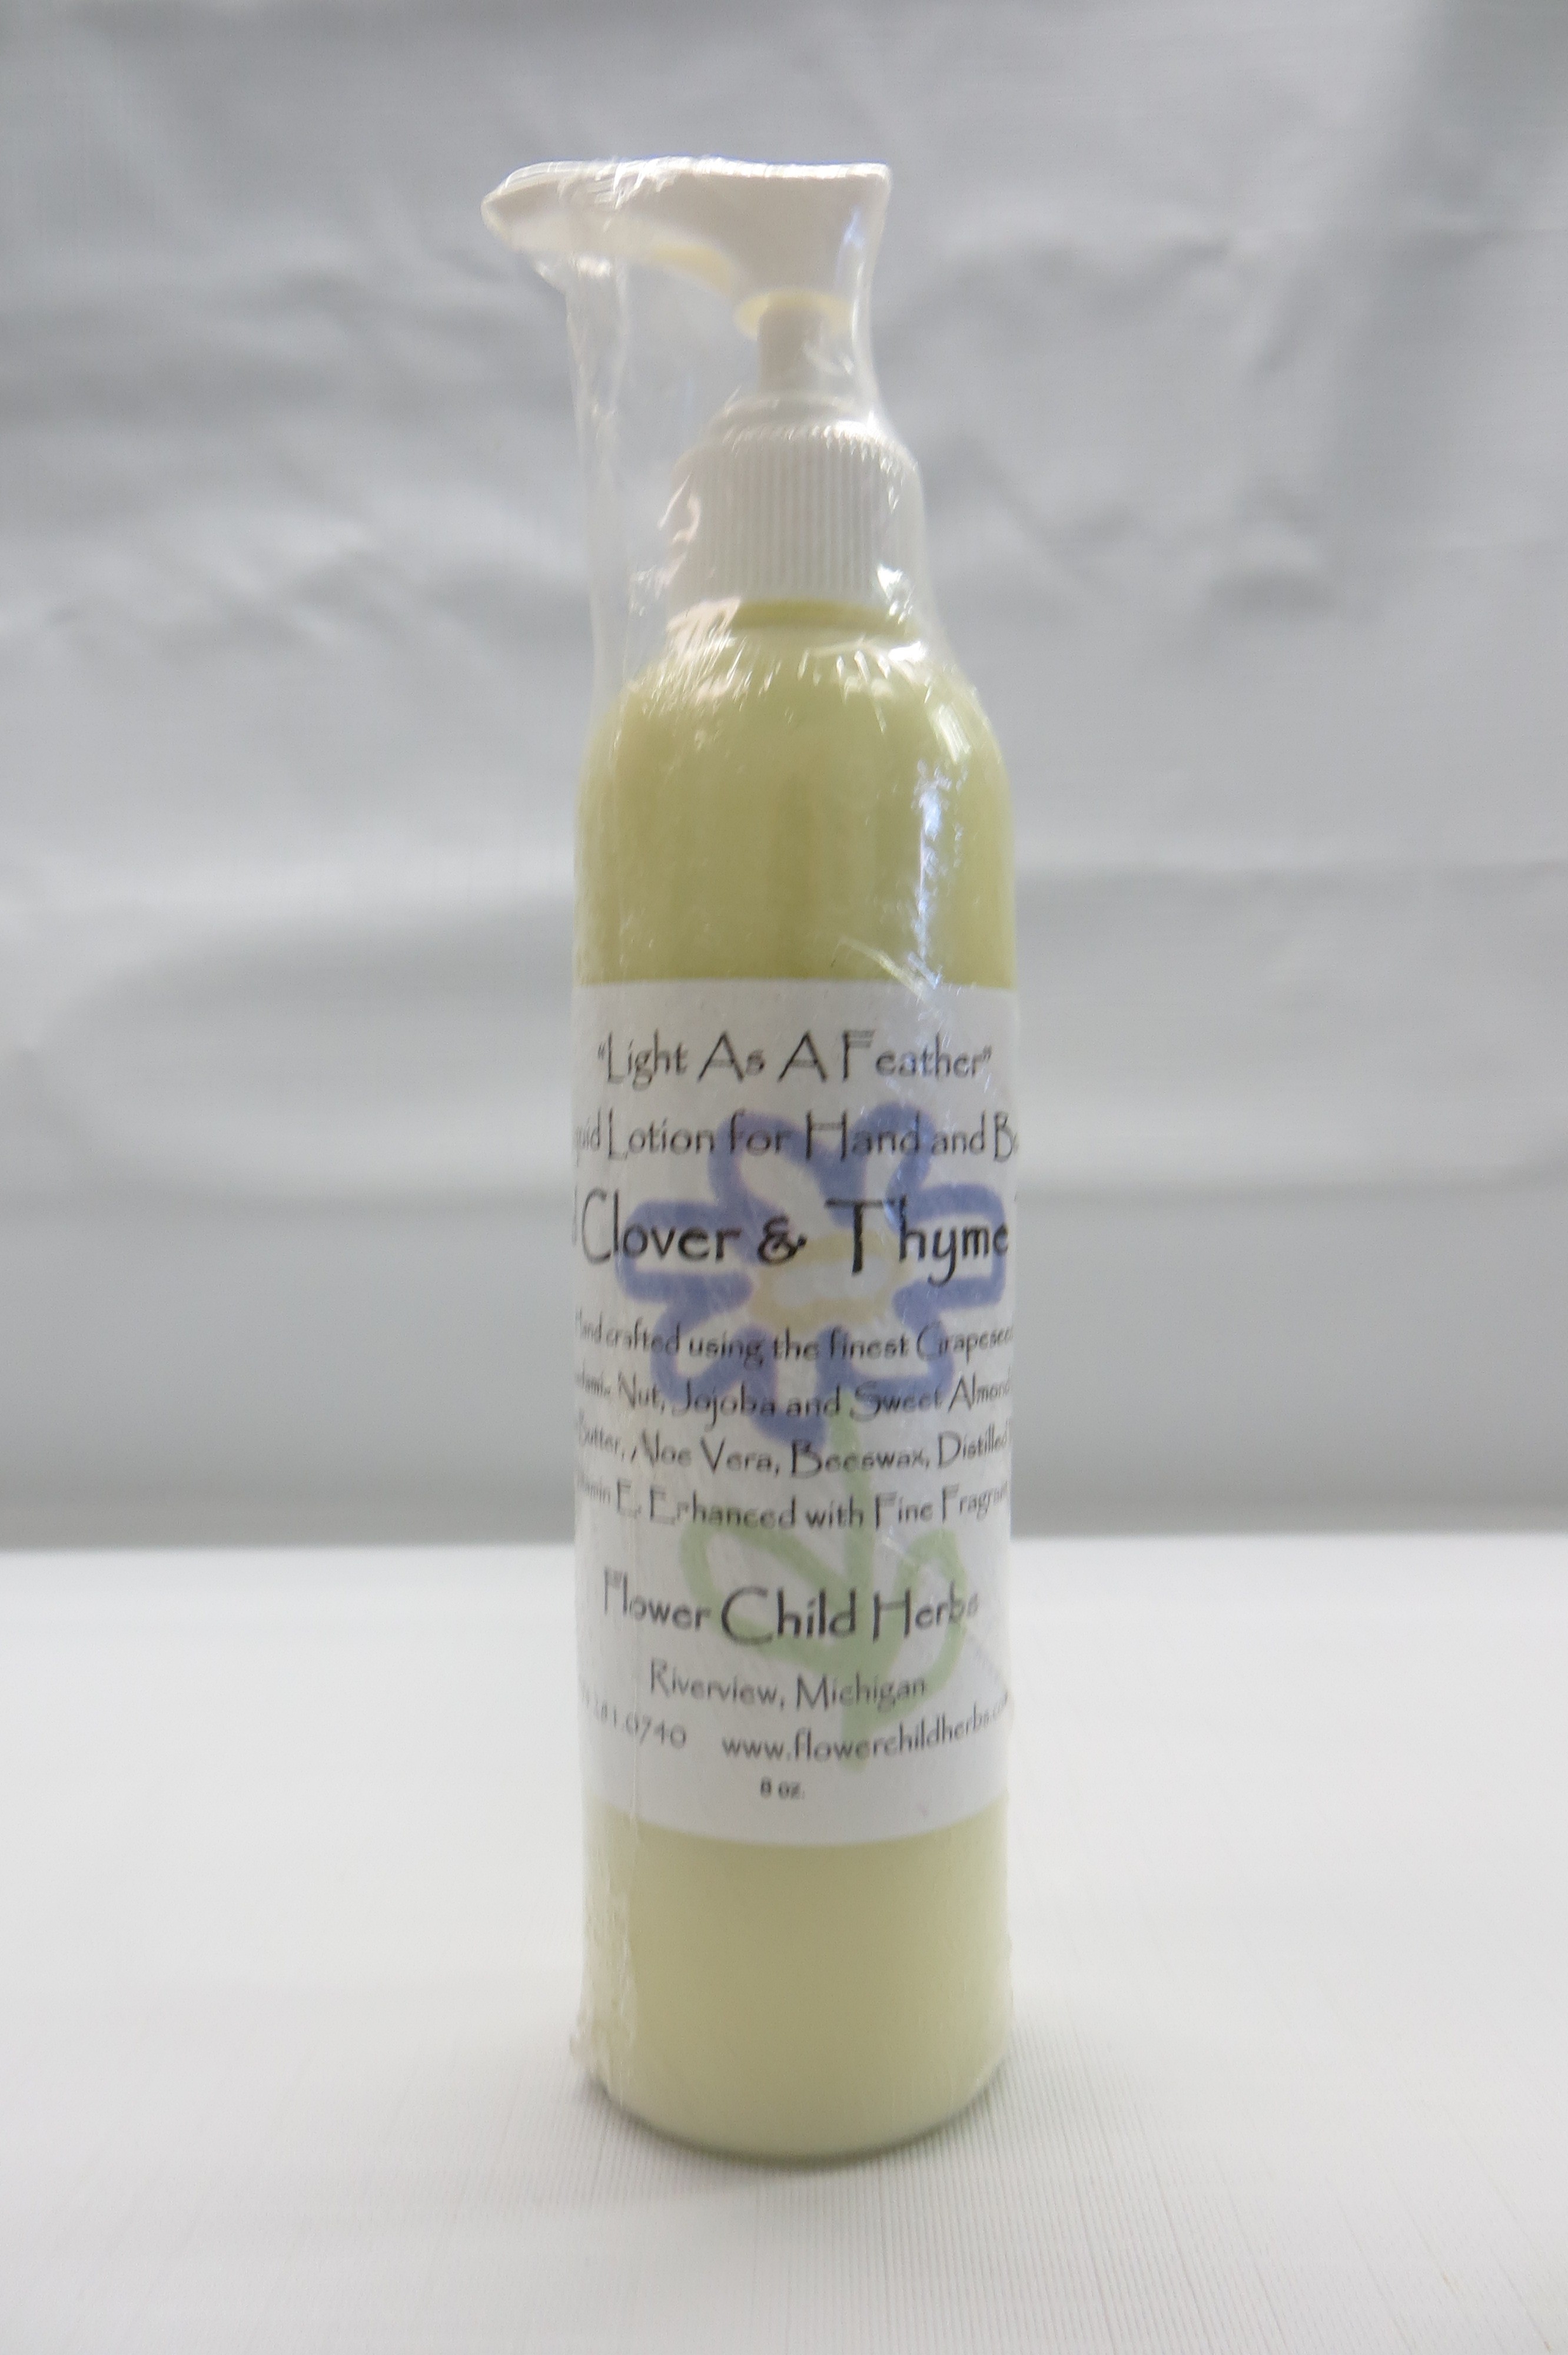 Red Clover & Thyme Tea "Light as a Feather" Lotion